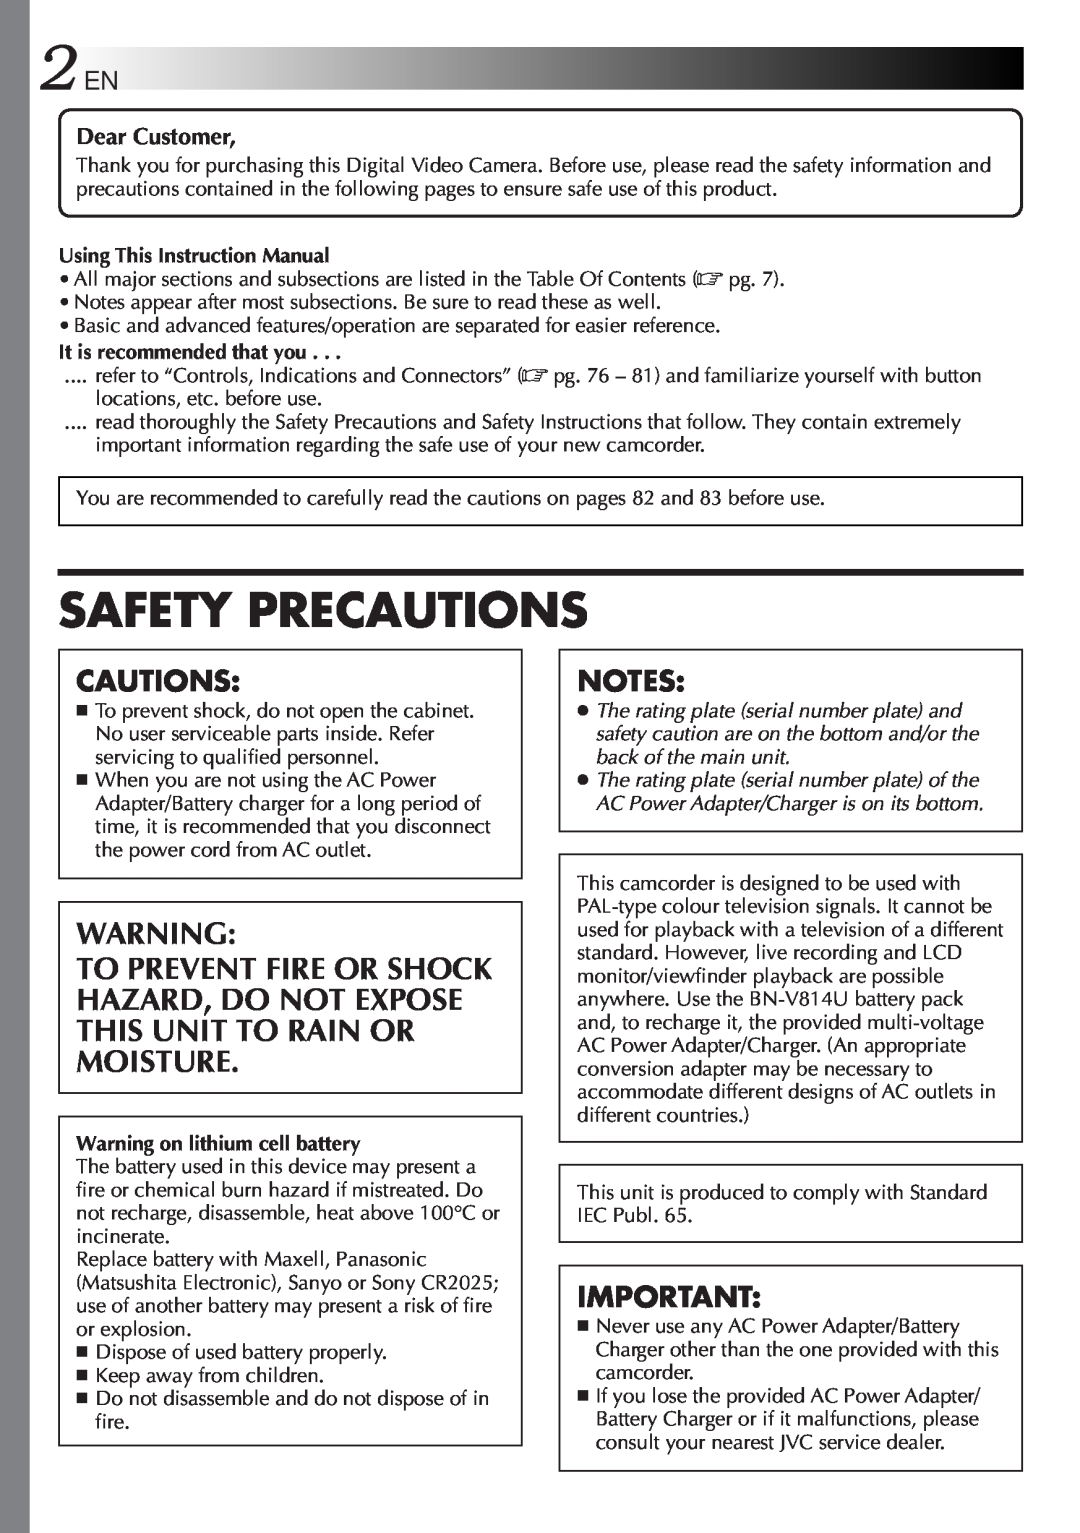 JVC GR-DVL9000 manual Cautions, Notes, Safety Precautions, Dear Customer, Using This Instruction Manual 